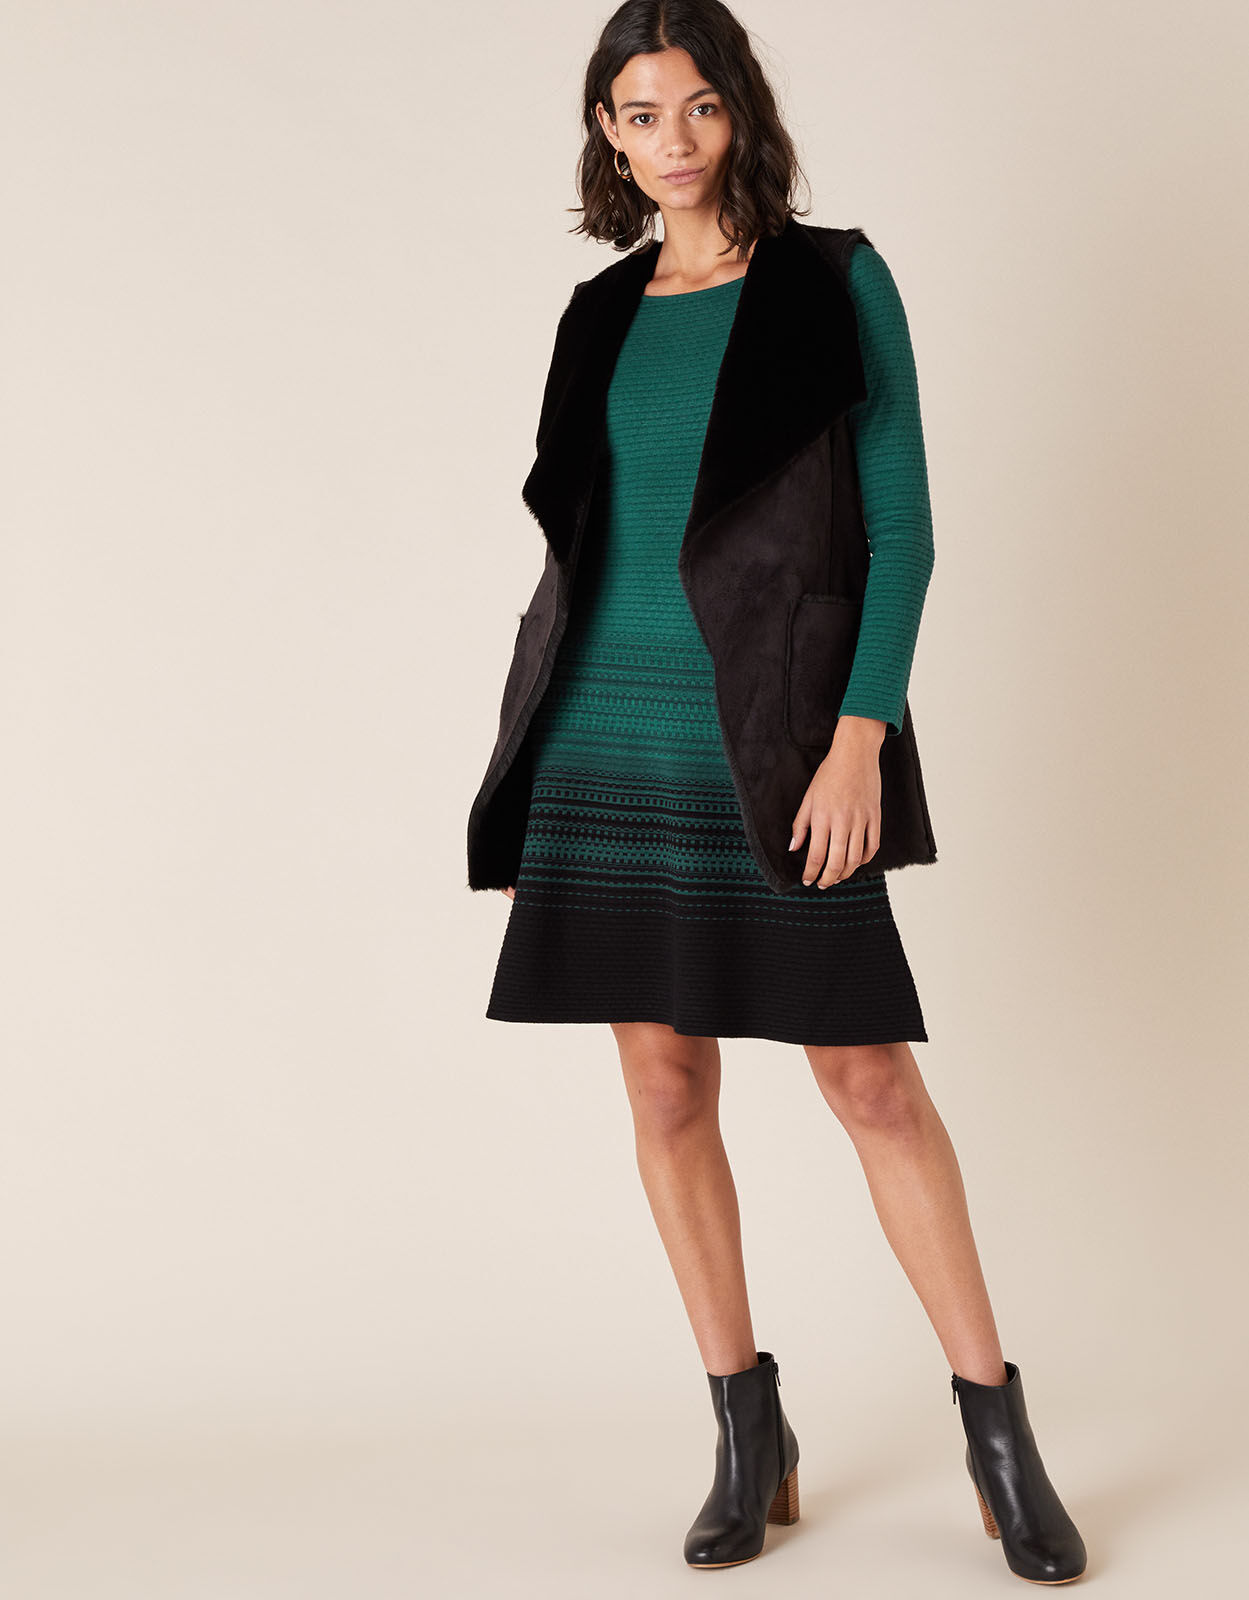 Ombre Knit Dress with Sustainable Viscose Green | Casual \u0026 Day Dresses |  Monsoon Global.